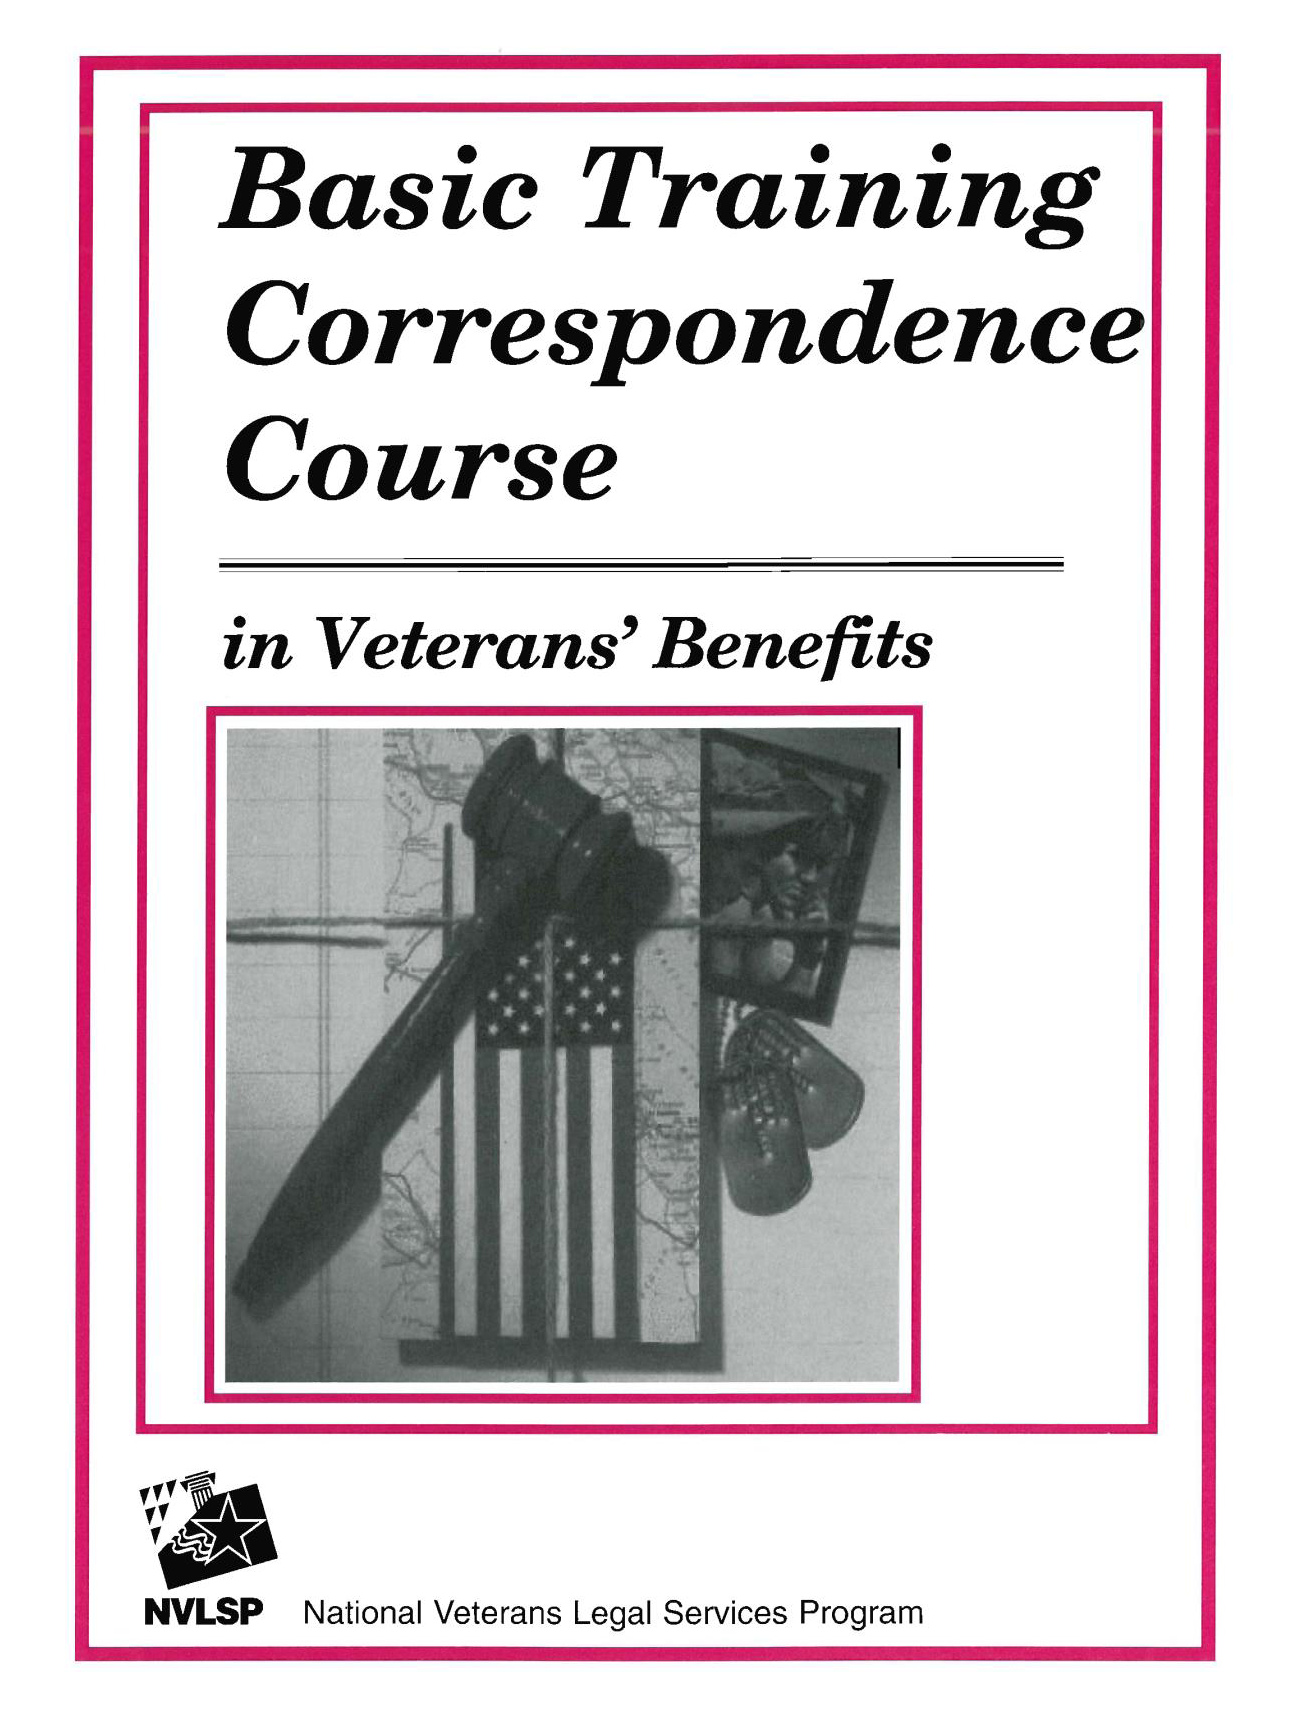 Updated: The Basic Training Course for Veterans Benefits